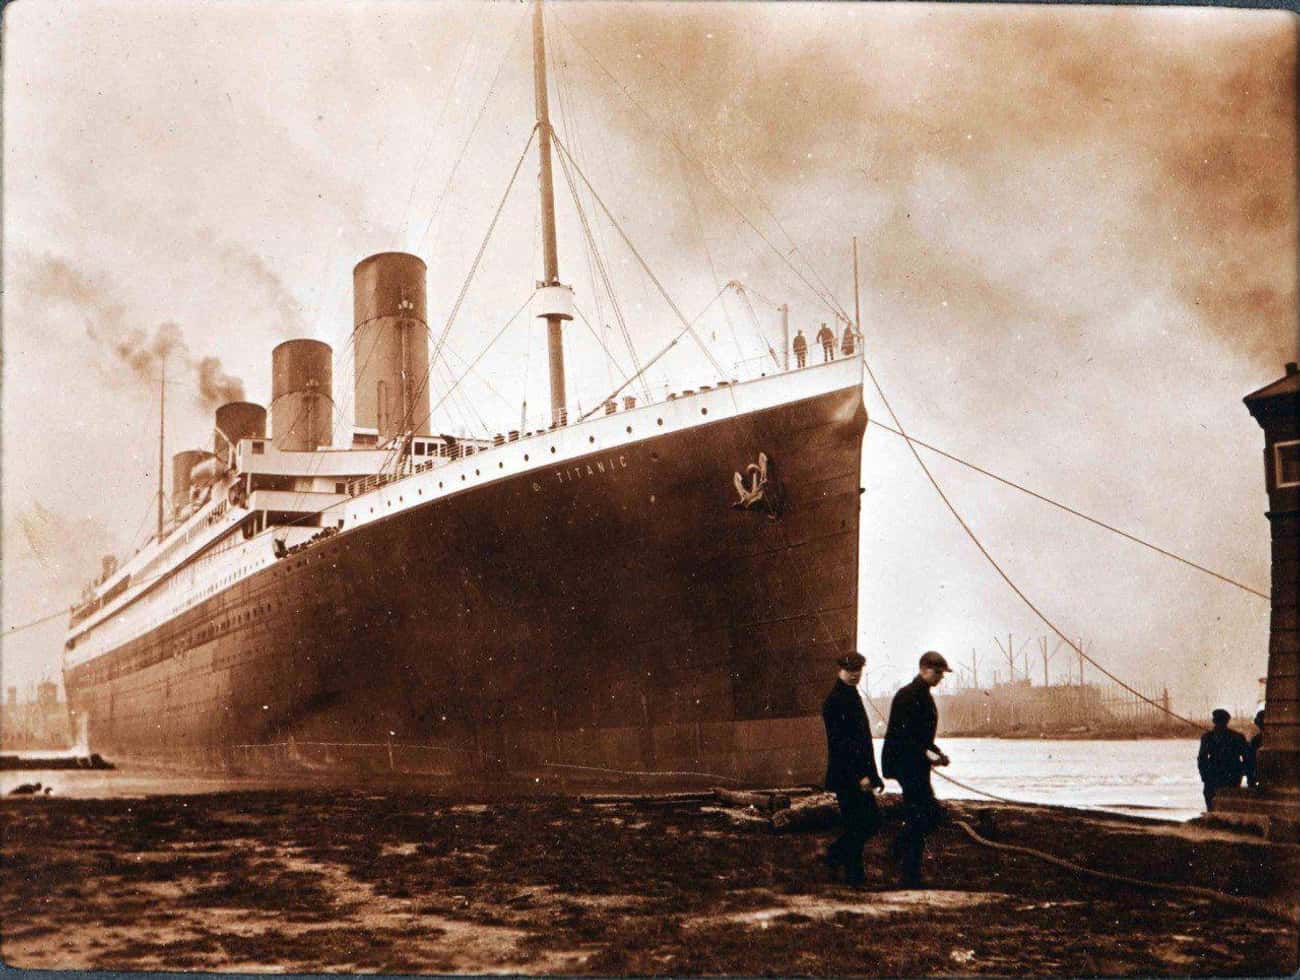 MYTH: The Ship Was Promoted As An 'Unsinkable' Vessel